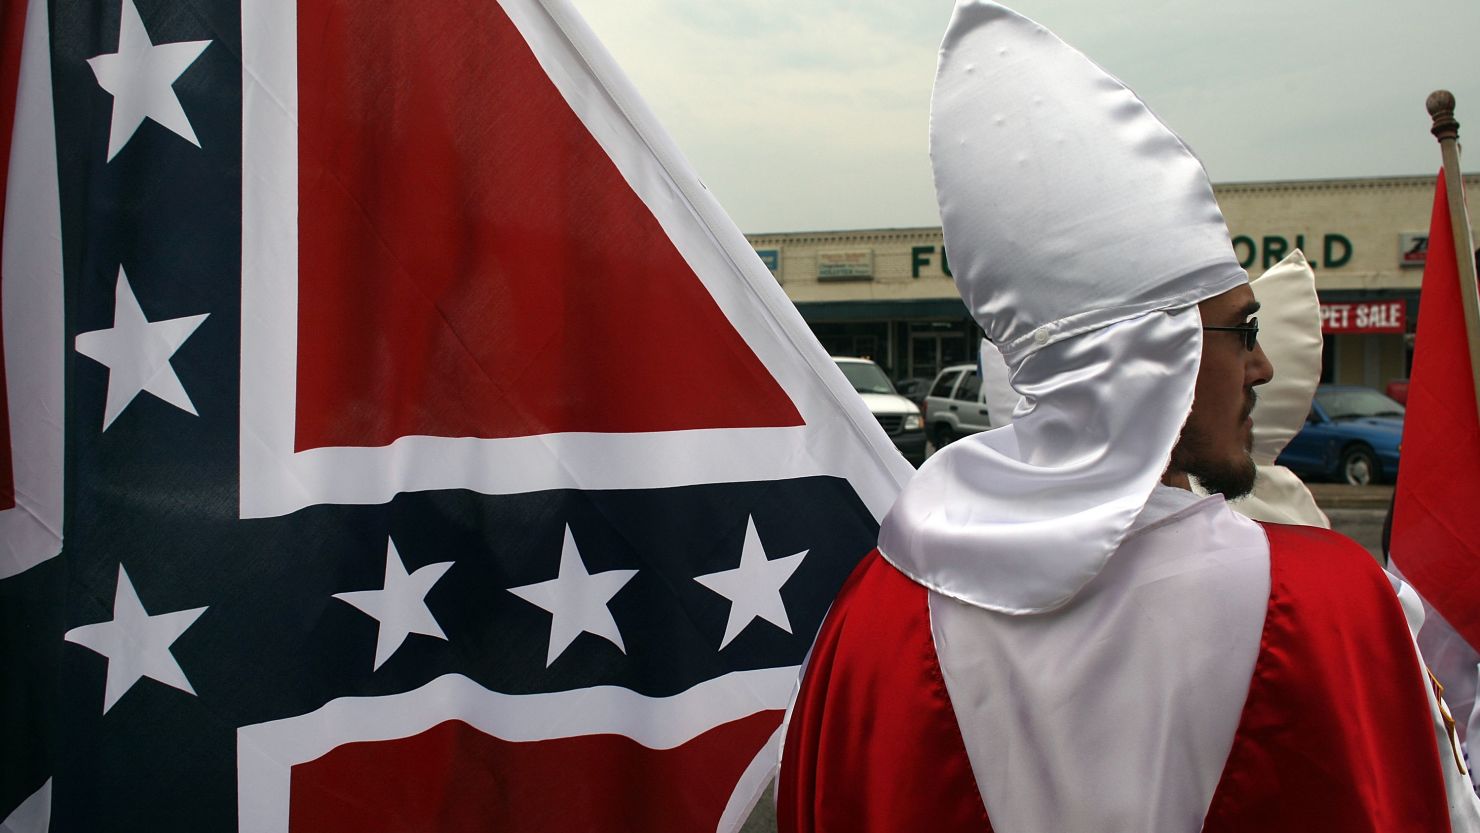 Members of the Fraternal White Knights of the Ku Klux Klan in Pulaski, Tennessee, in 2009.